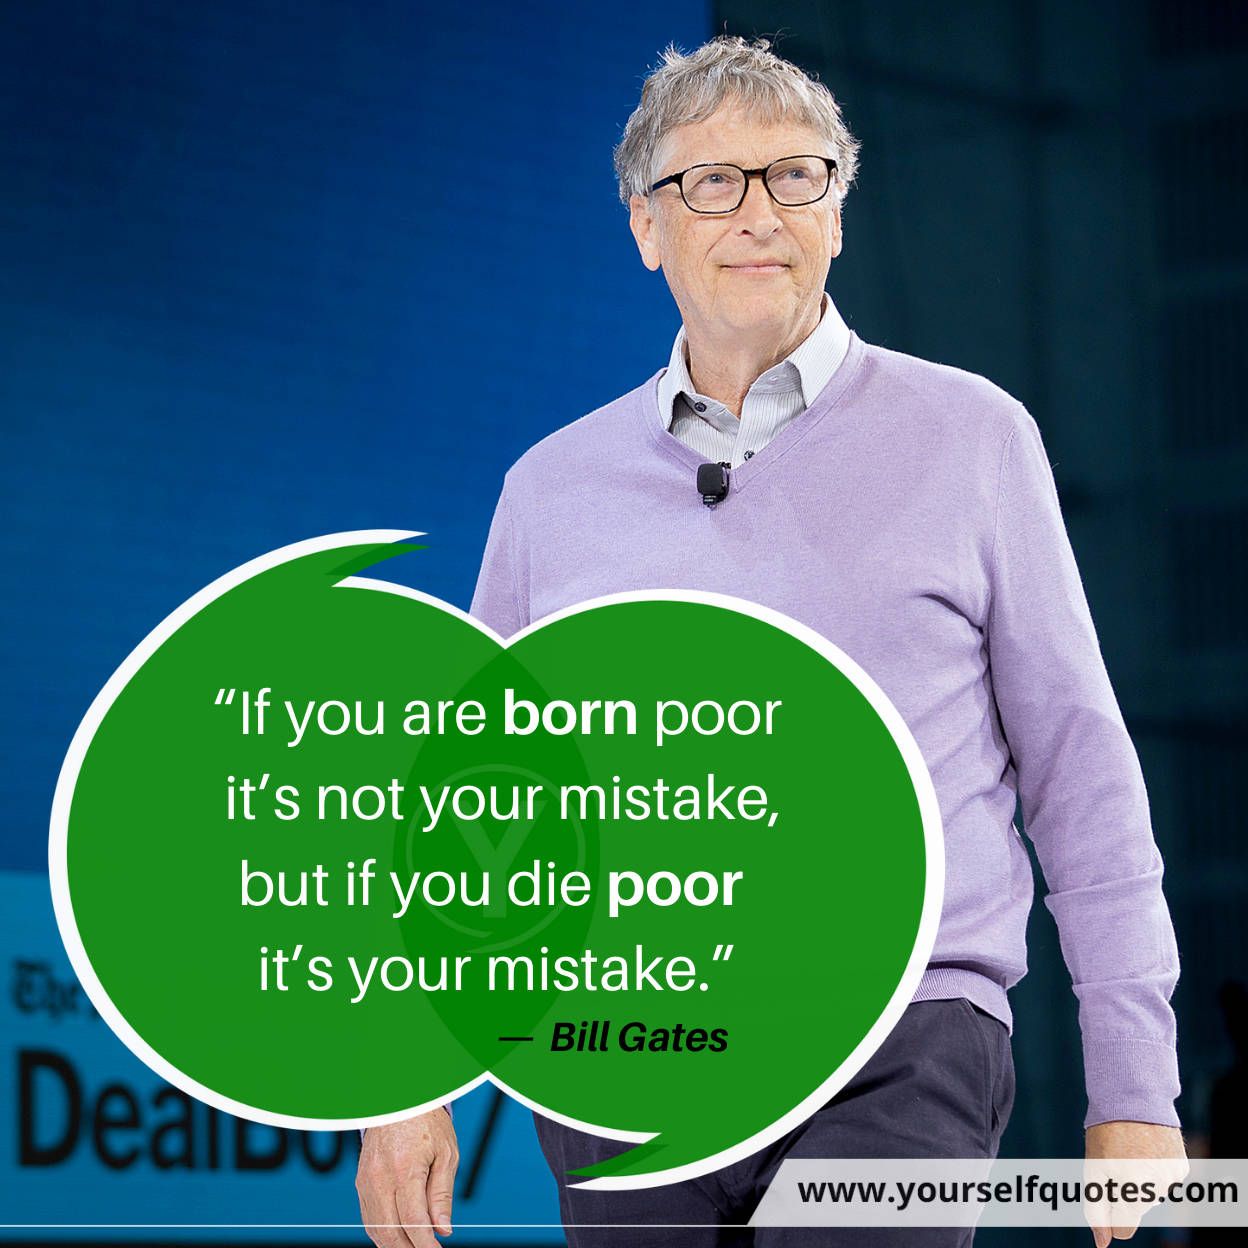 Bill Gates Quotes That Will Make You Think in Life